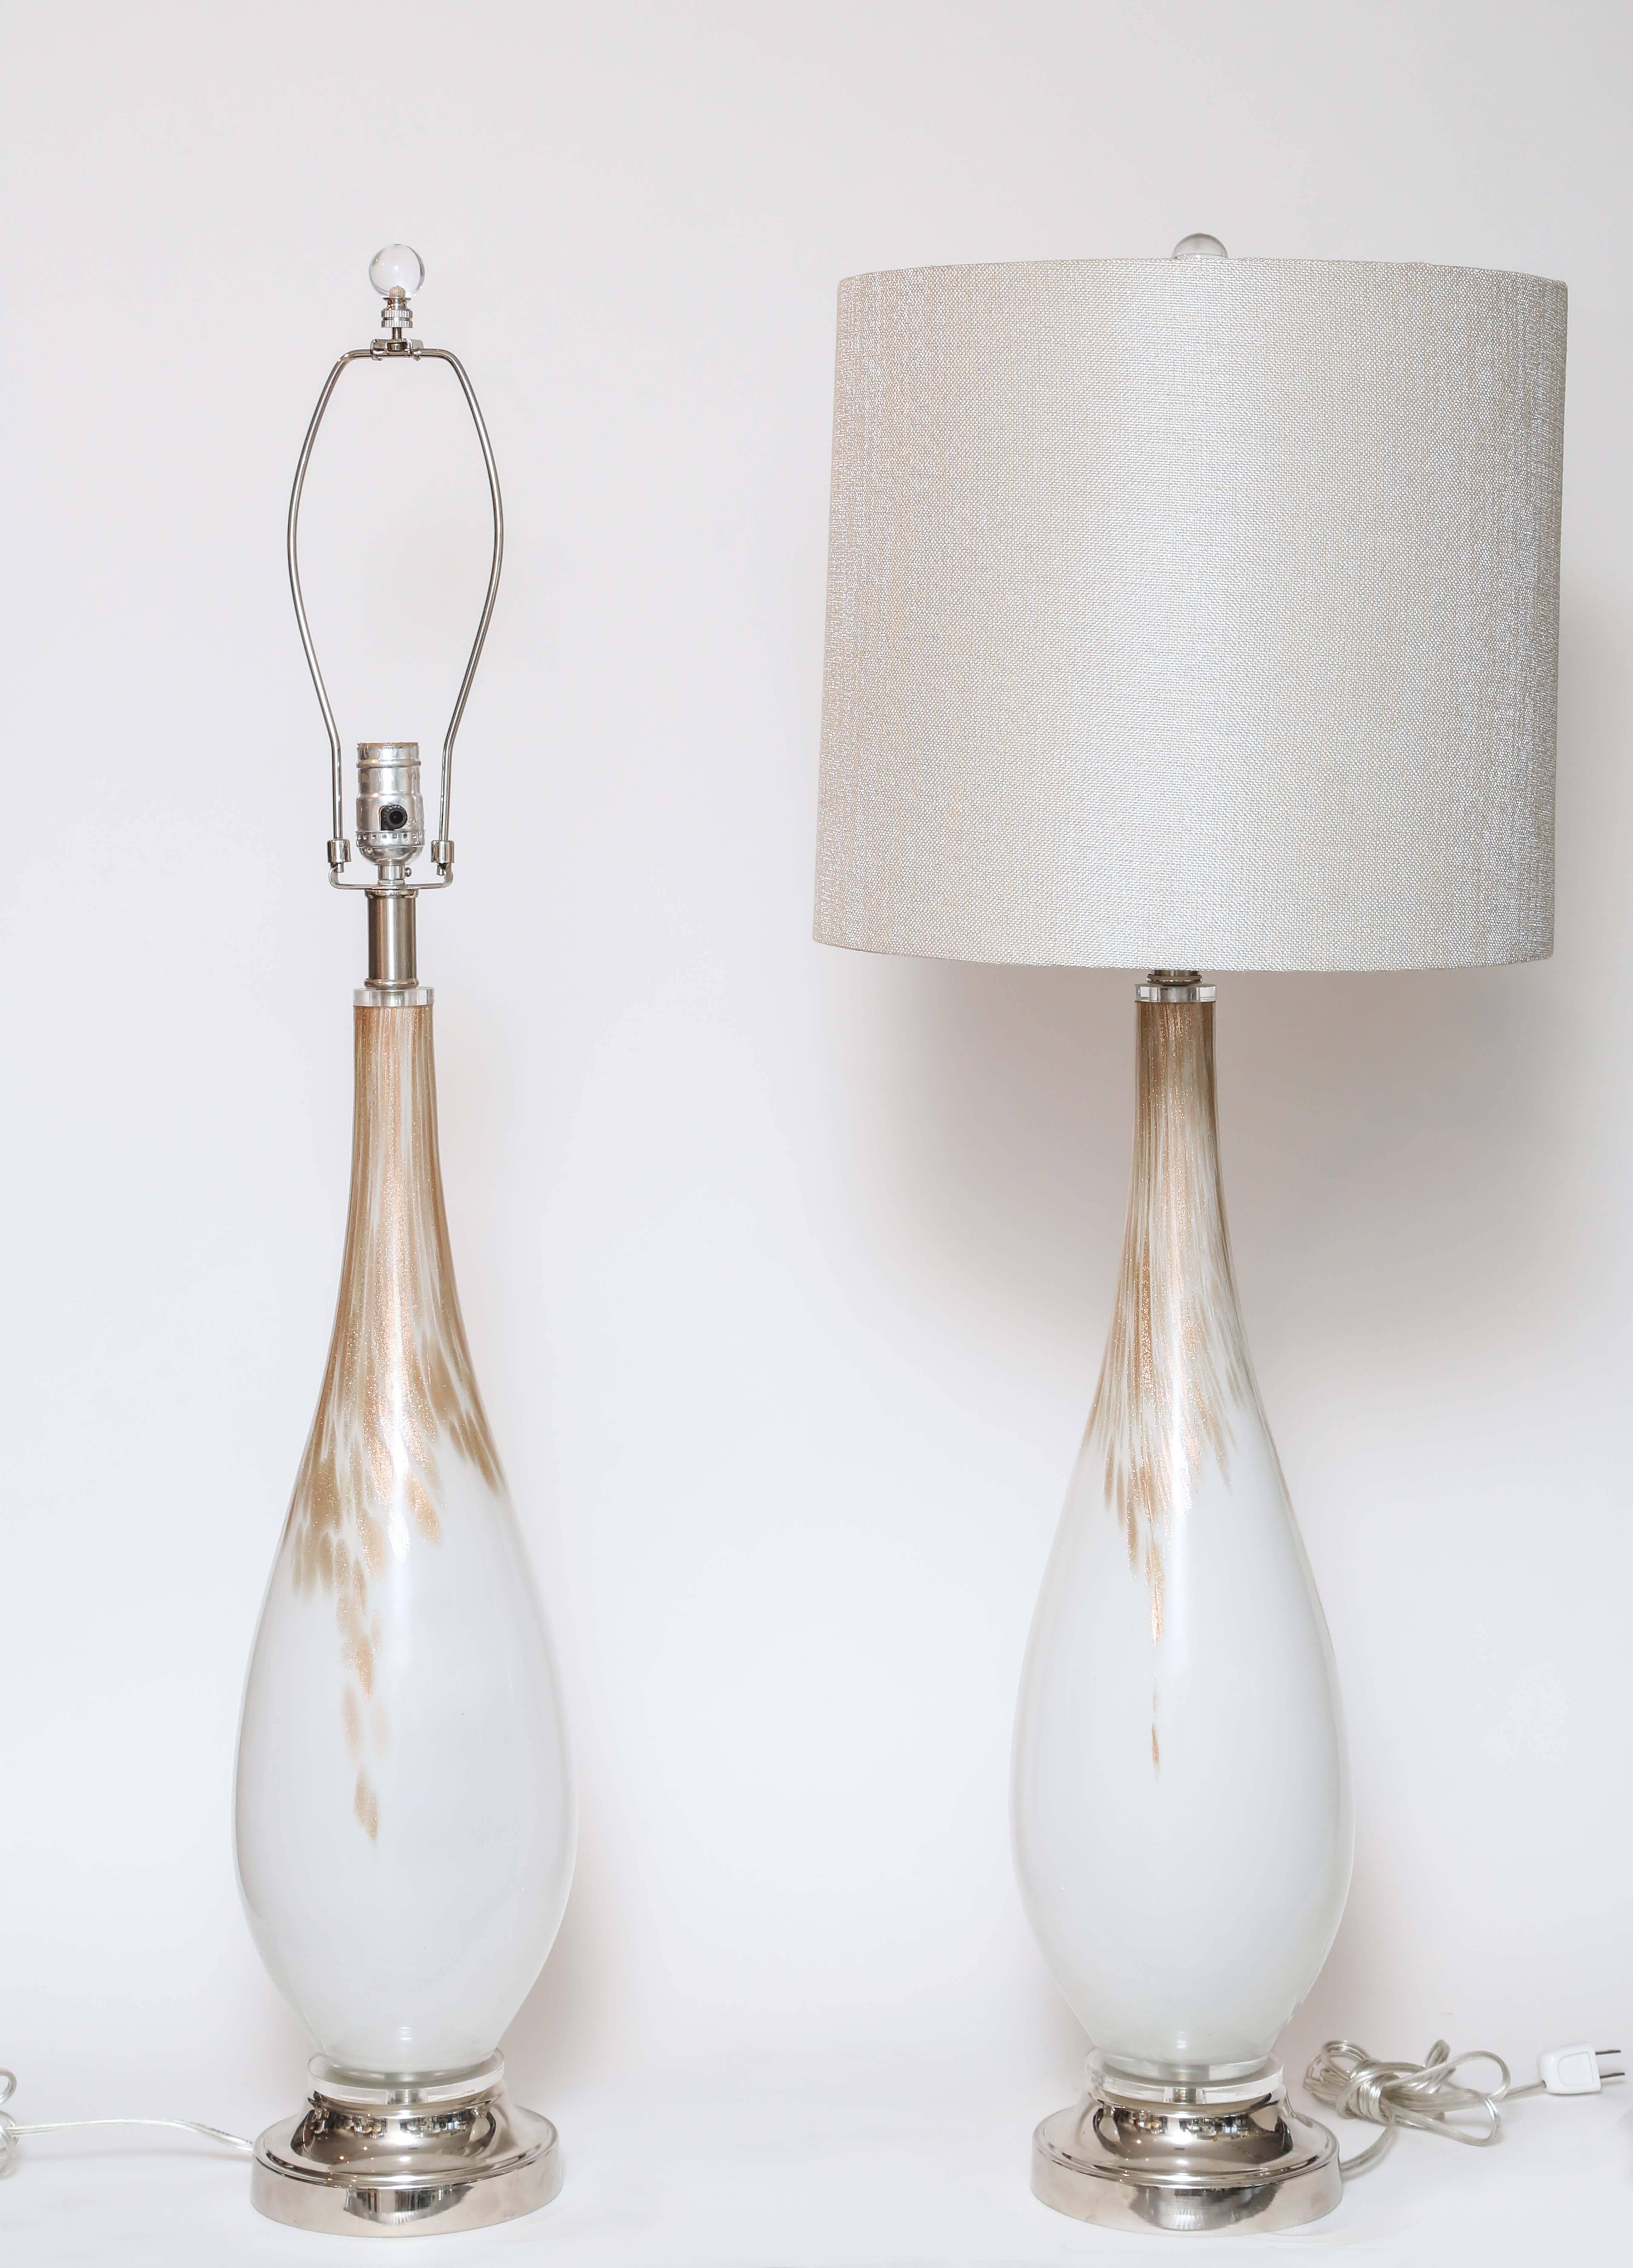 Metal chrome base, teardrop shape glass in white with copper flecks running down the neck. Linen shades and clear glass ball finial. These lamps have been refurbished, so they are in very good shape.